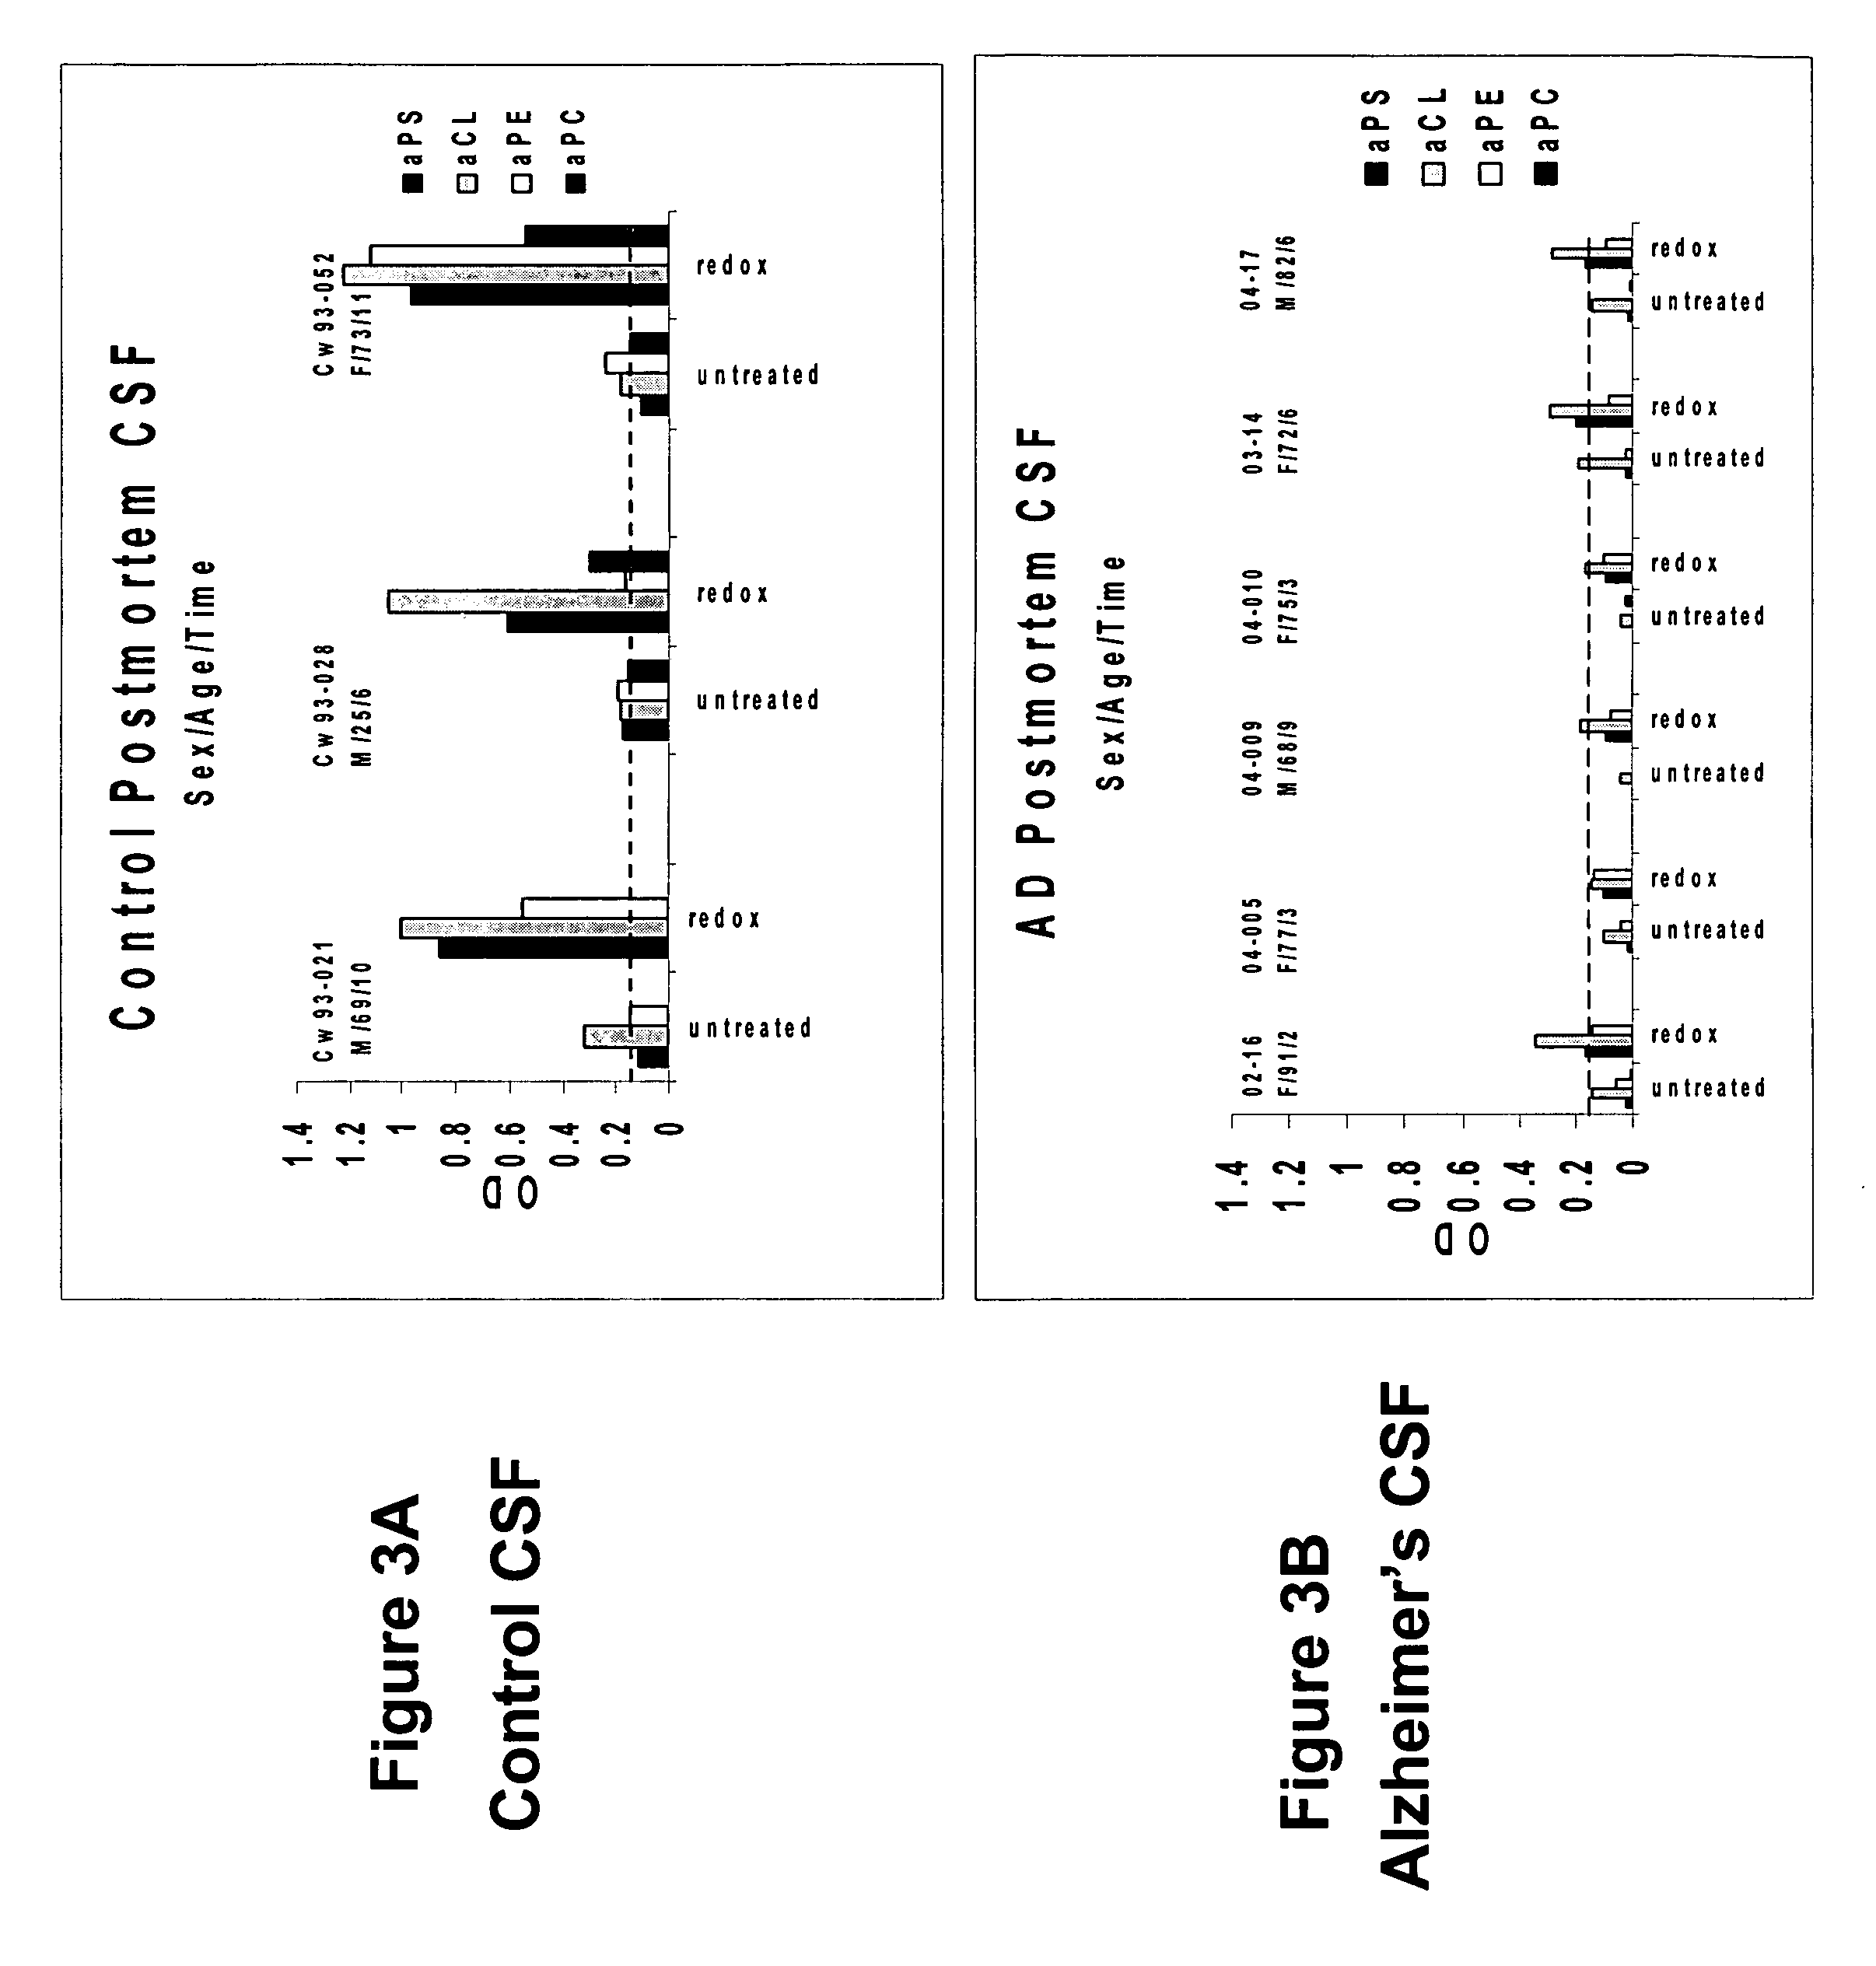 Method of detecting or diagnosing of a neurodegenerative disease or condition